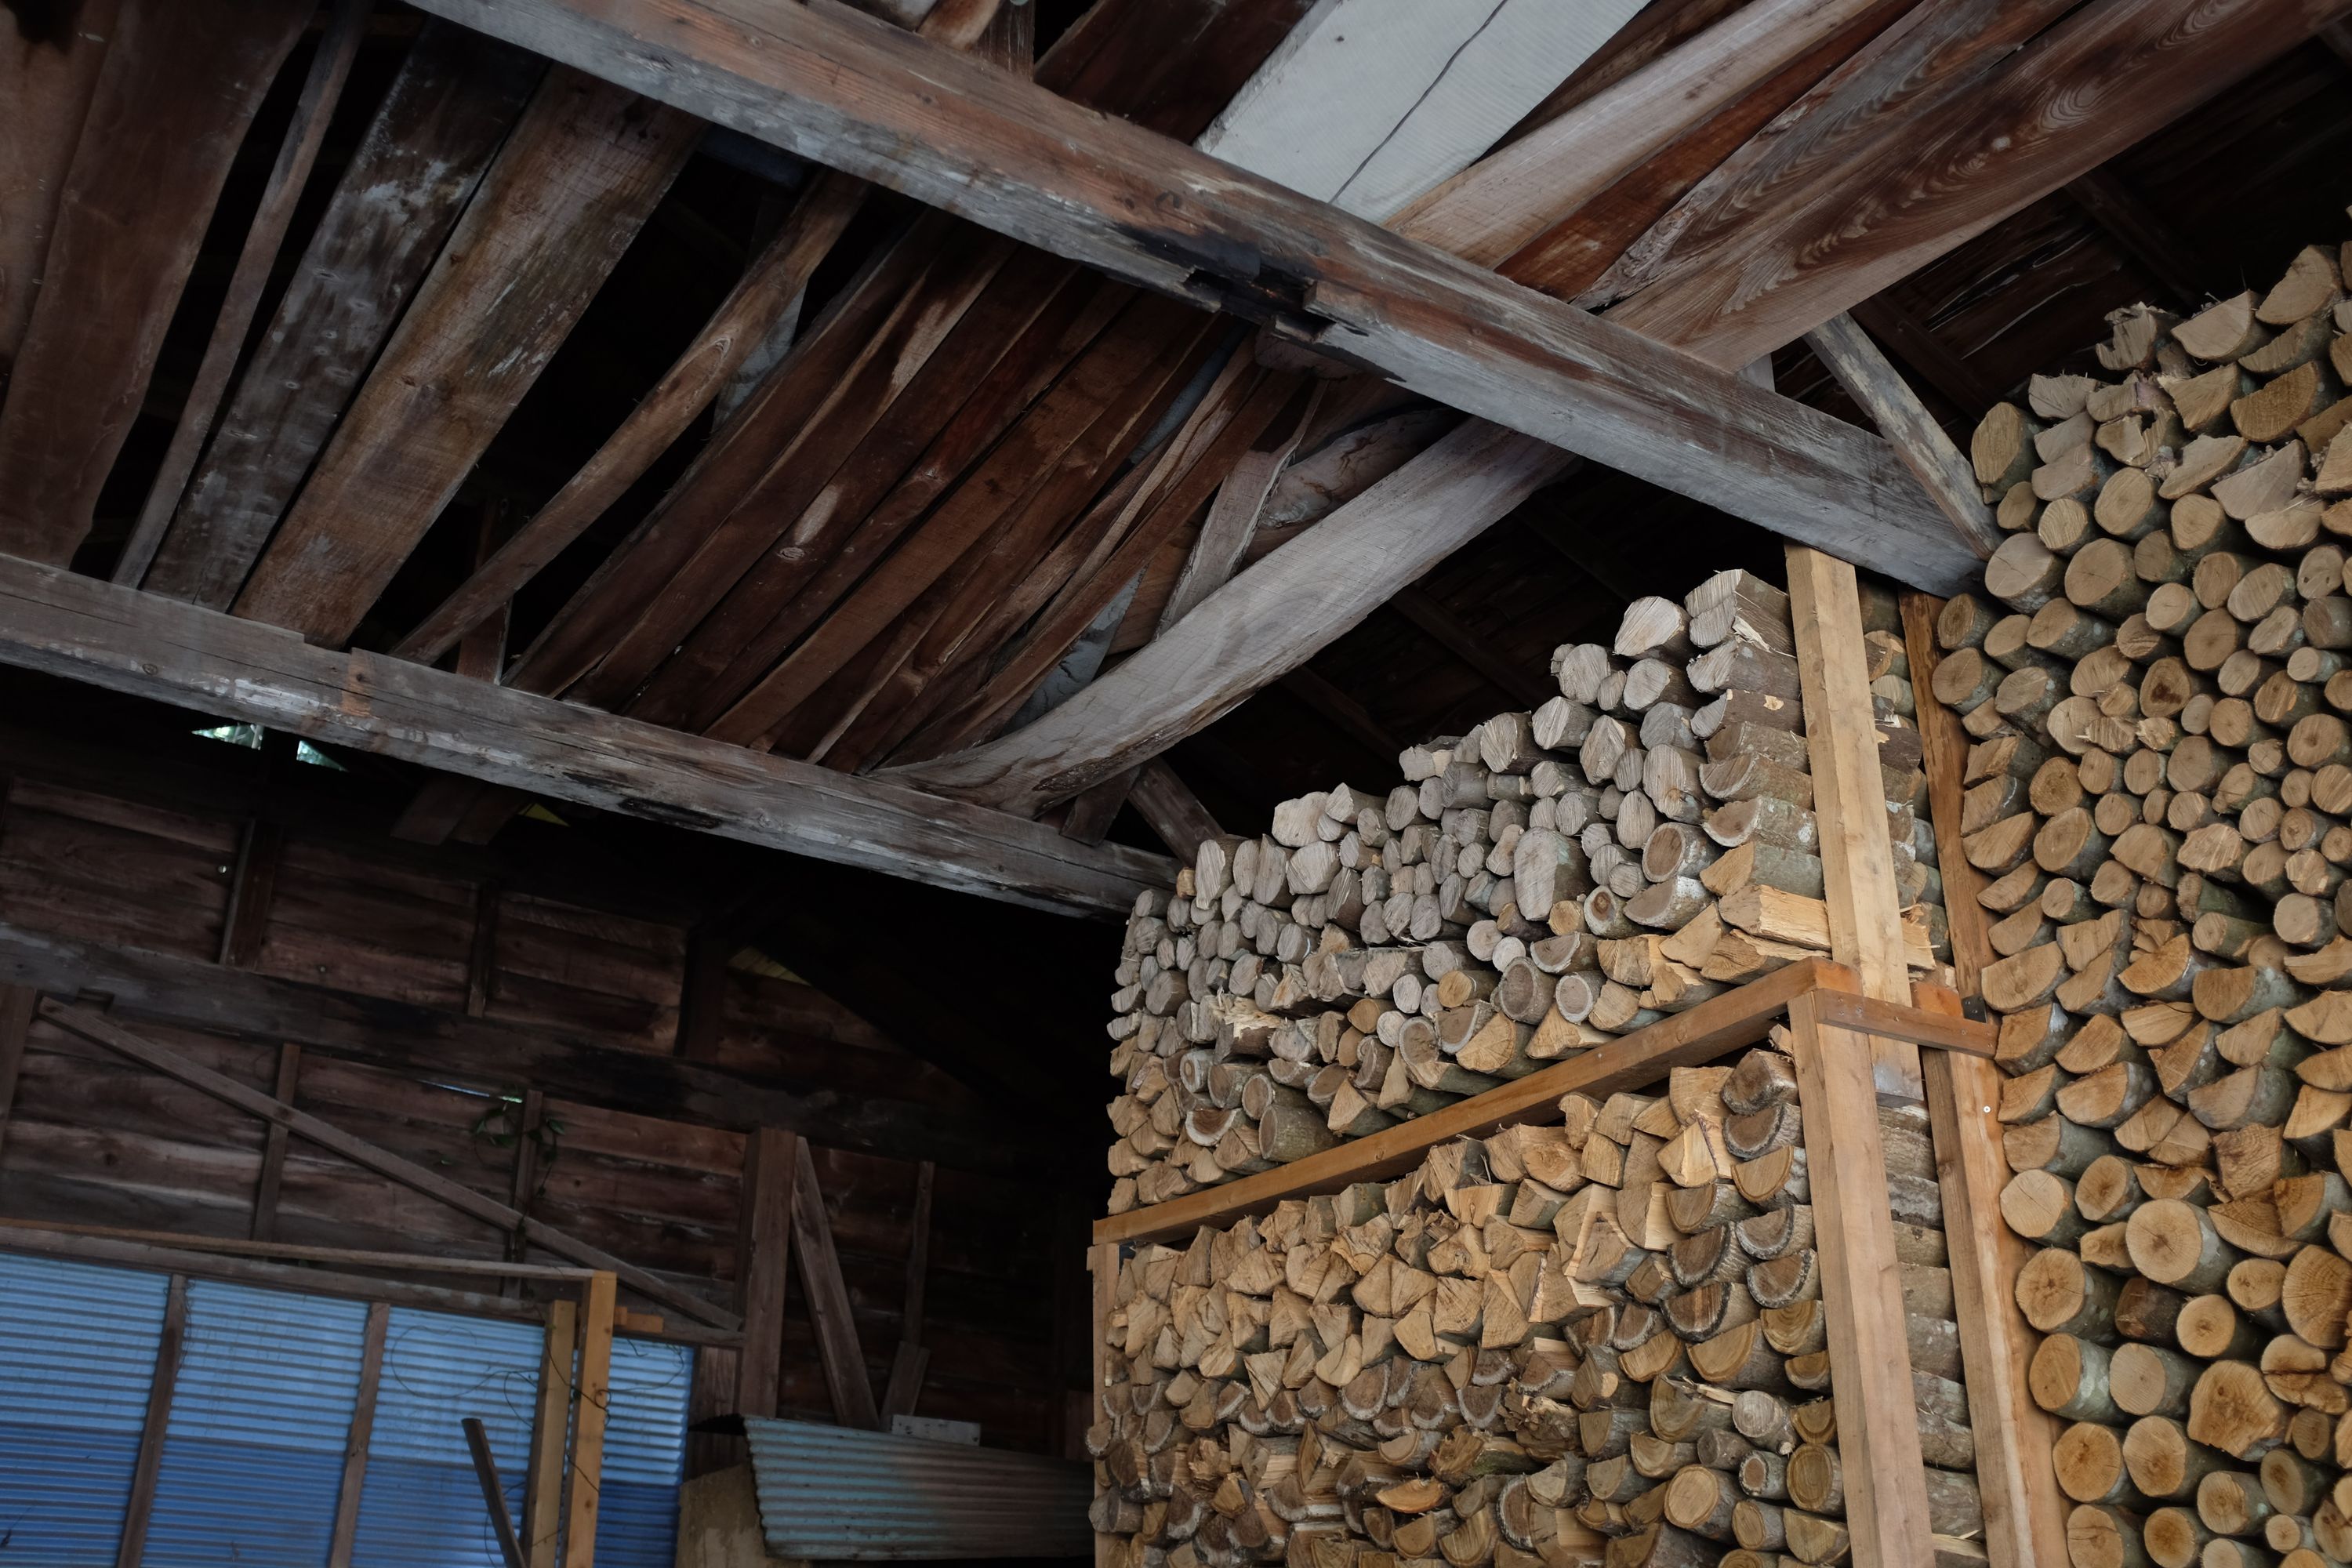 A stacks of firewood in a shed.